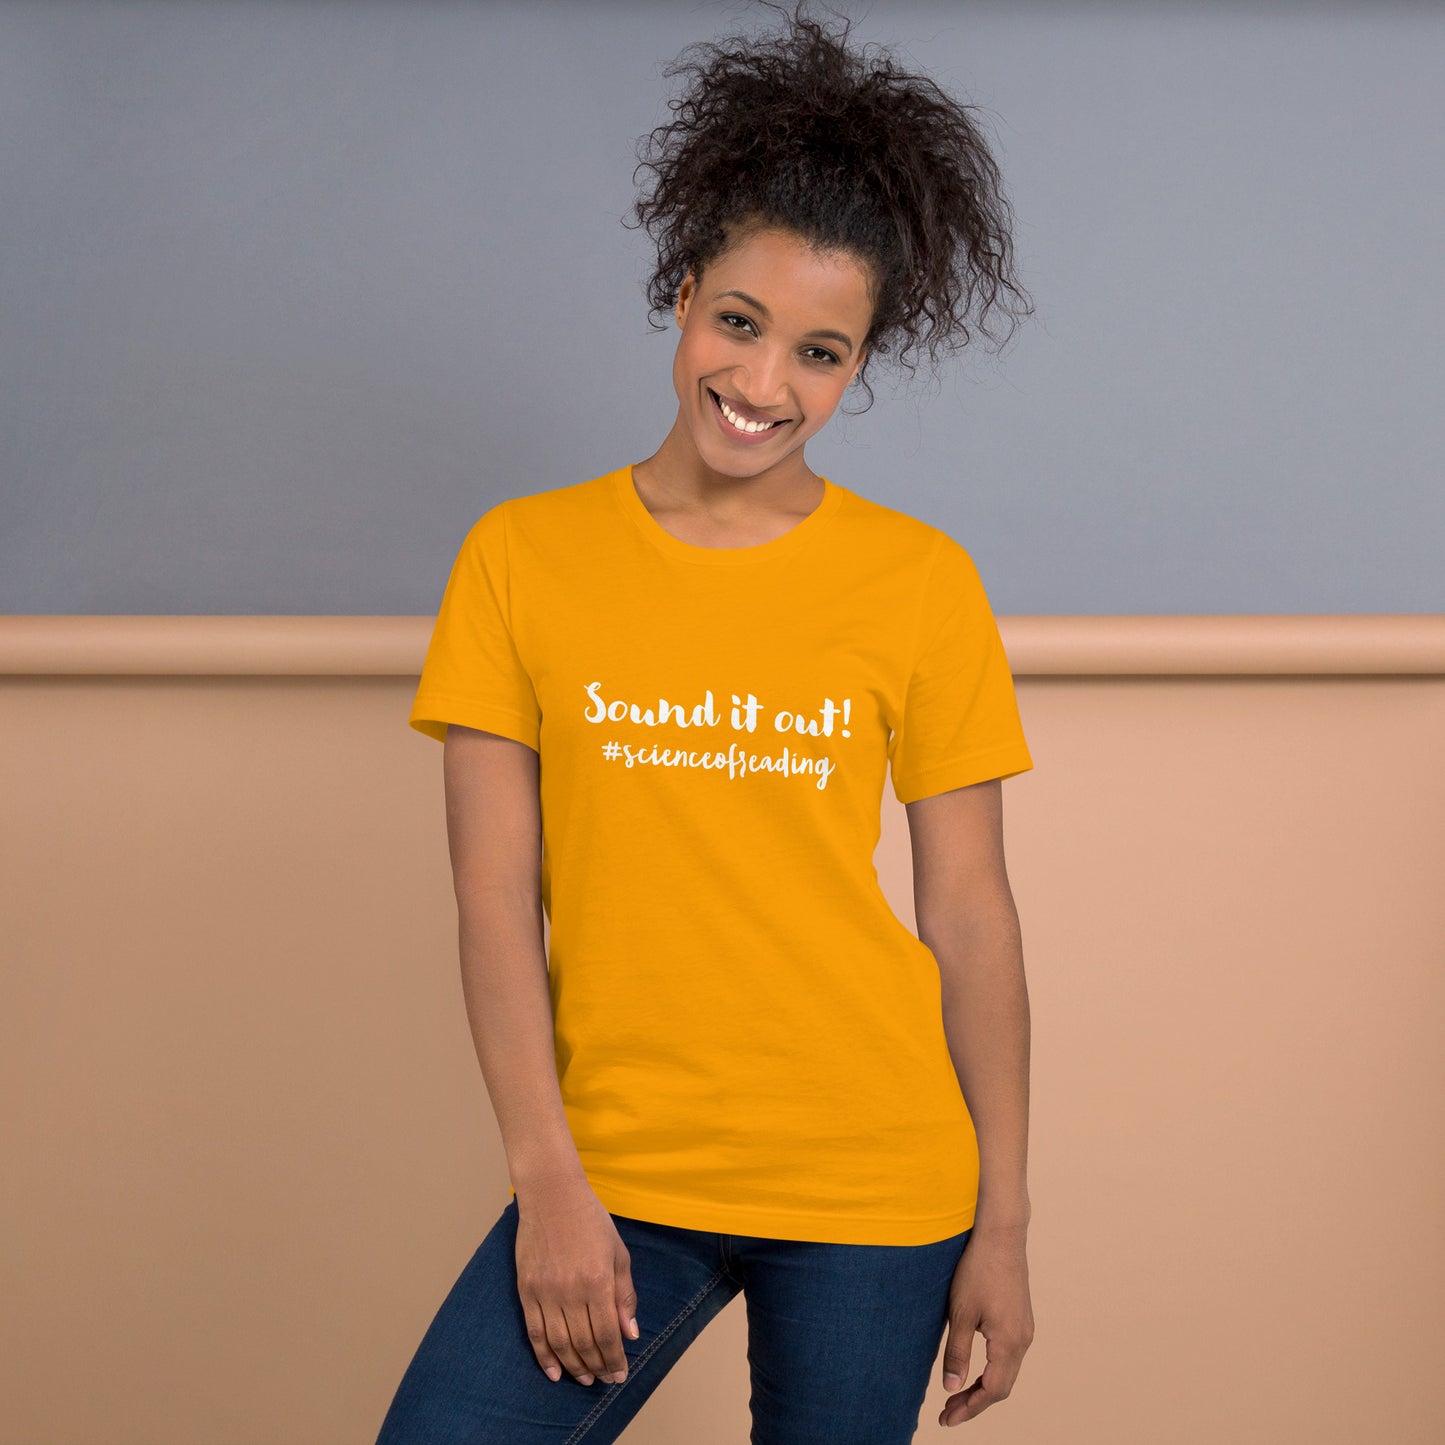 Sound it out decode Unisex t-shirt Reading teacher educator gift science of reading book coach interventionist phonics